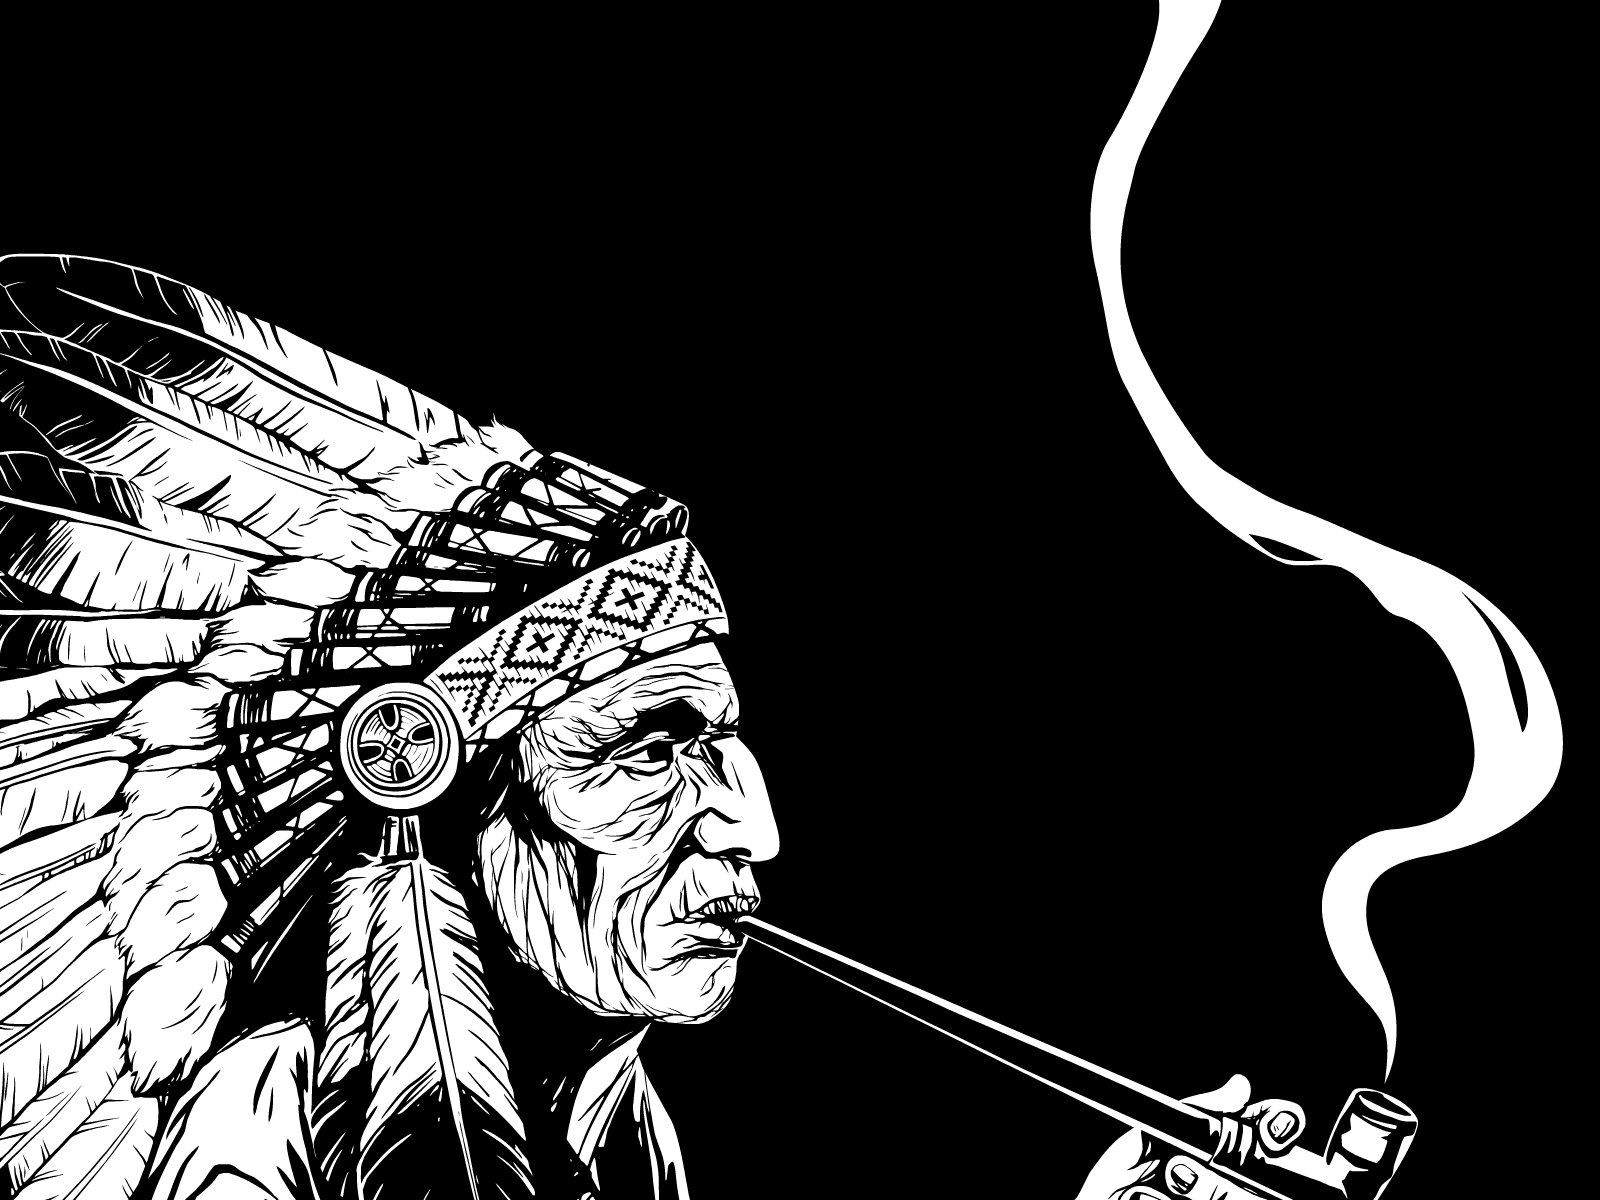 Оld Indian chief smoking a pipe 2d american indian animation black and white chief feathers headdress illustration native old people pipe portrait sketch smoke smoking tattoo thanksgiving day vector wild west